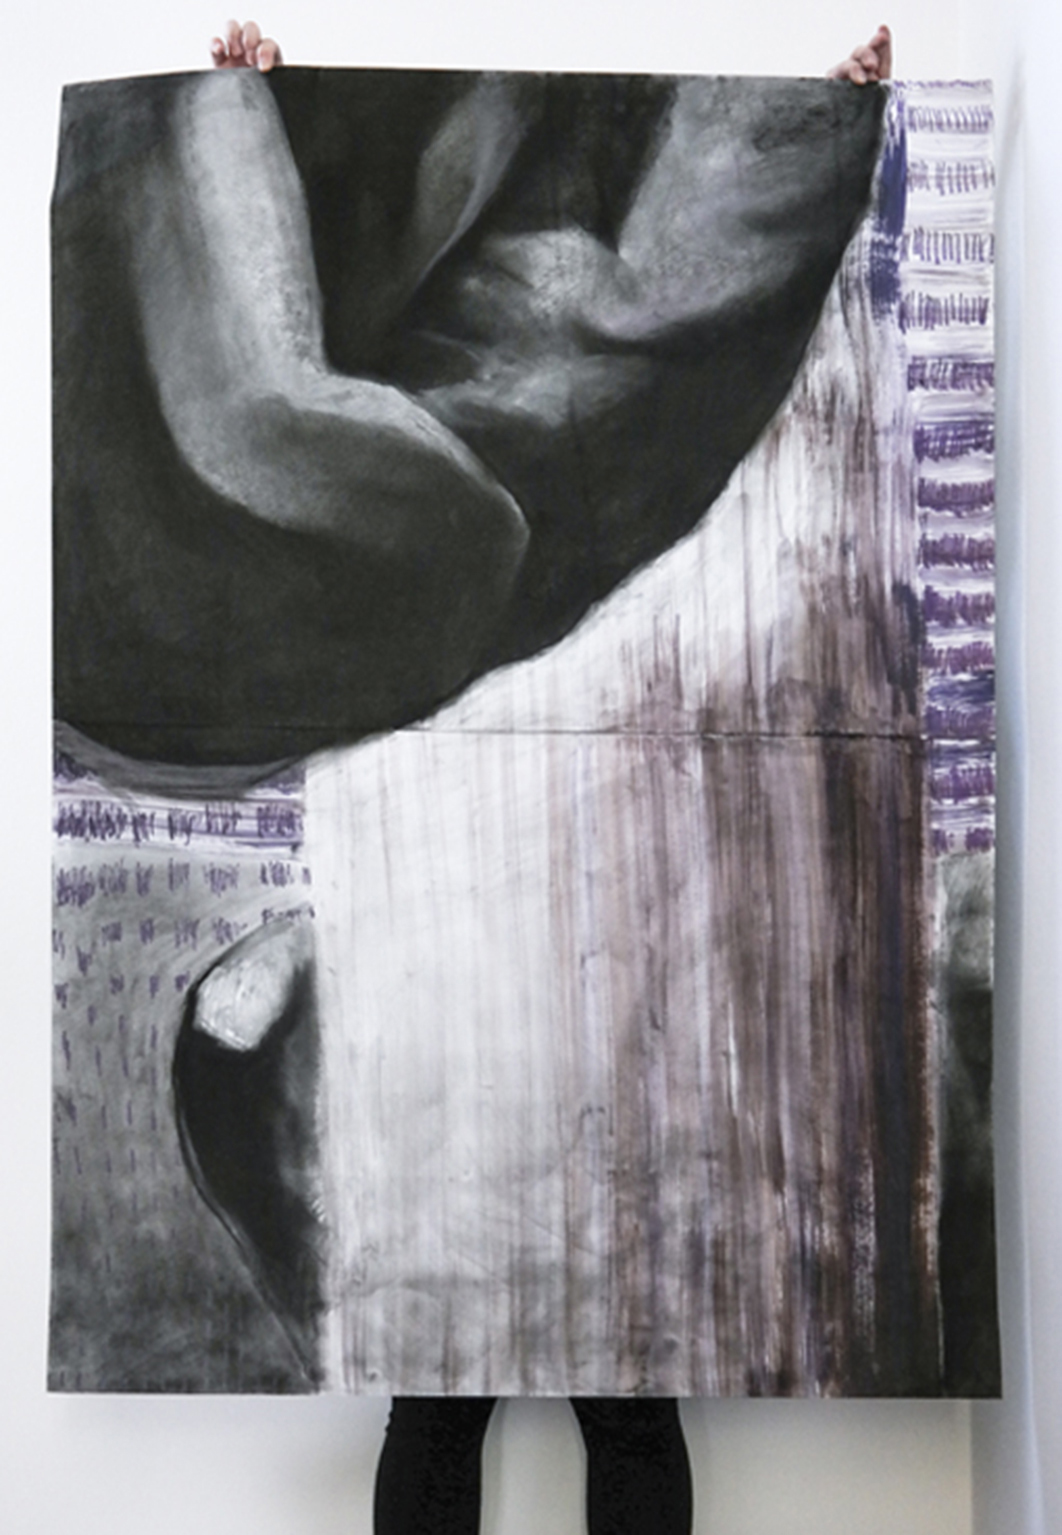 drawings, abstract, aesthetic, expressive, figurative, illustrative, portraiture, bodies, patterns, sexuality, black, brown, violet, white, acrylic, charcoal, paper, abstract-forms, beautiful, contemporary-art, danish, decorative, design, interior, interior-design, men, modern, modern-art, nordic, nude, pretty, scandinavien, Buy original high quality art. Paintings, drawings, limited edition prints & posters by talented artists.